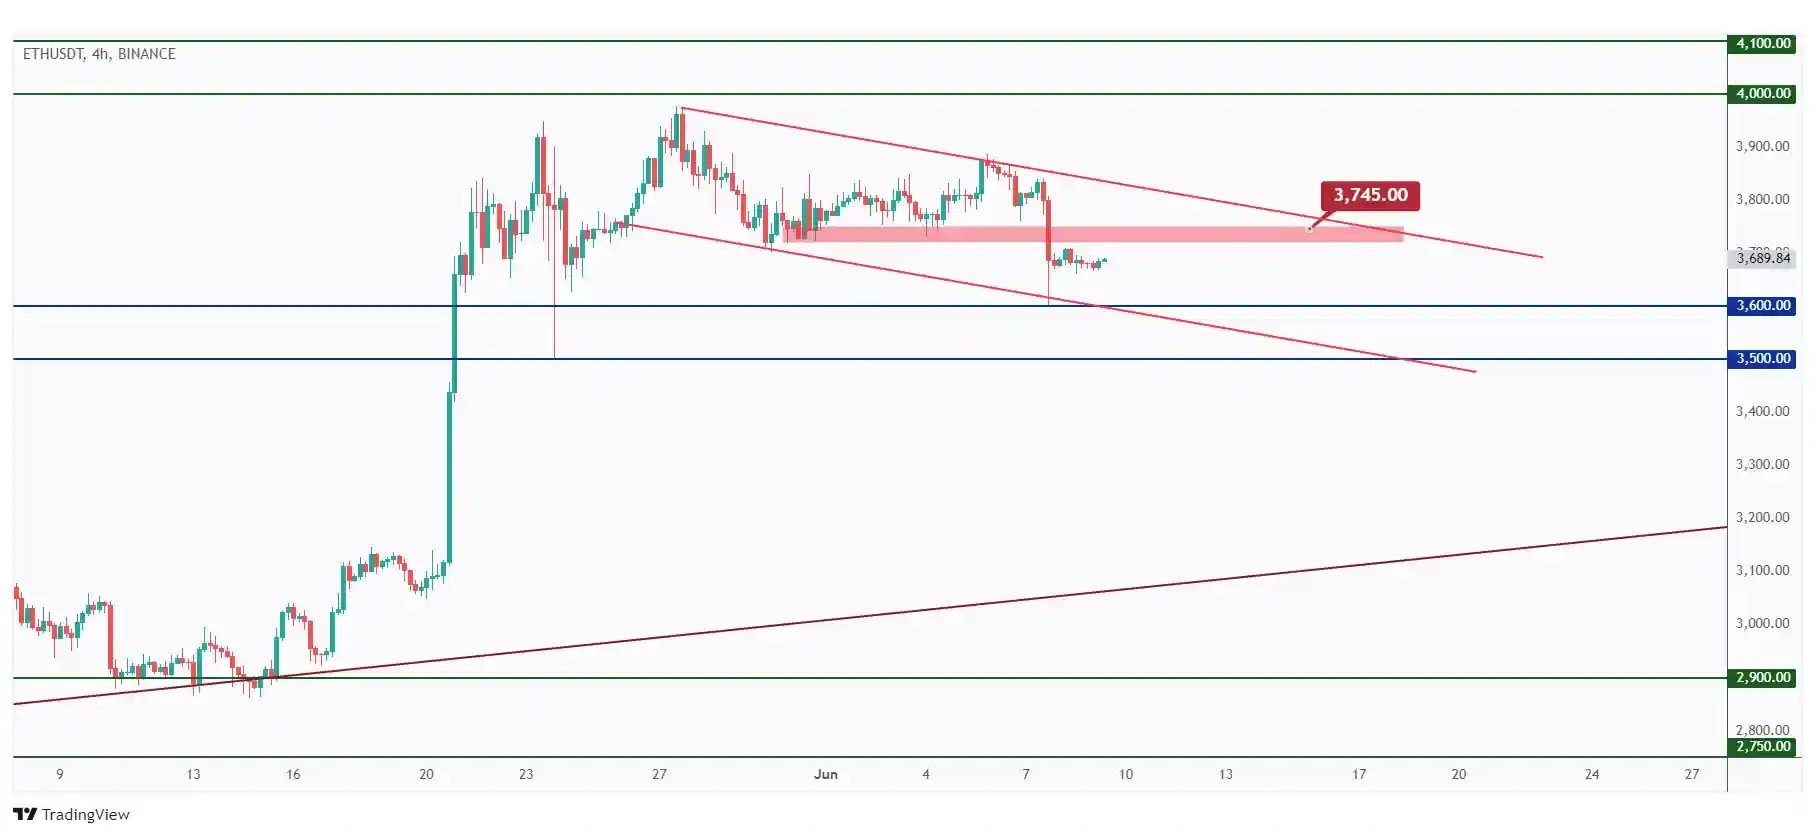 ETH 4h chart overall bearish trading within a falling channel and approaching a strong support at $3,500.